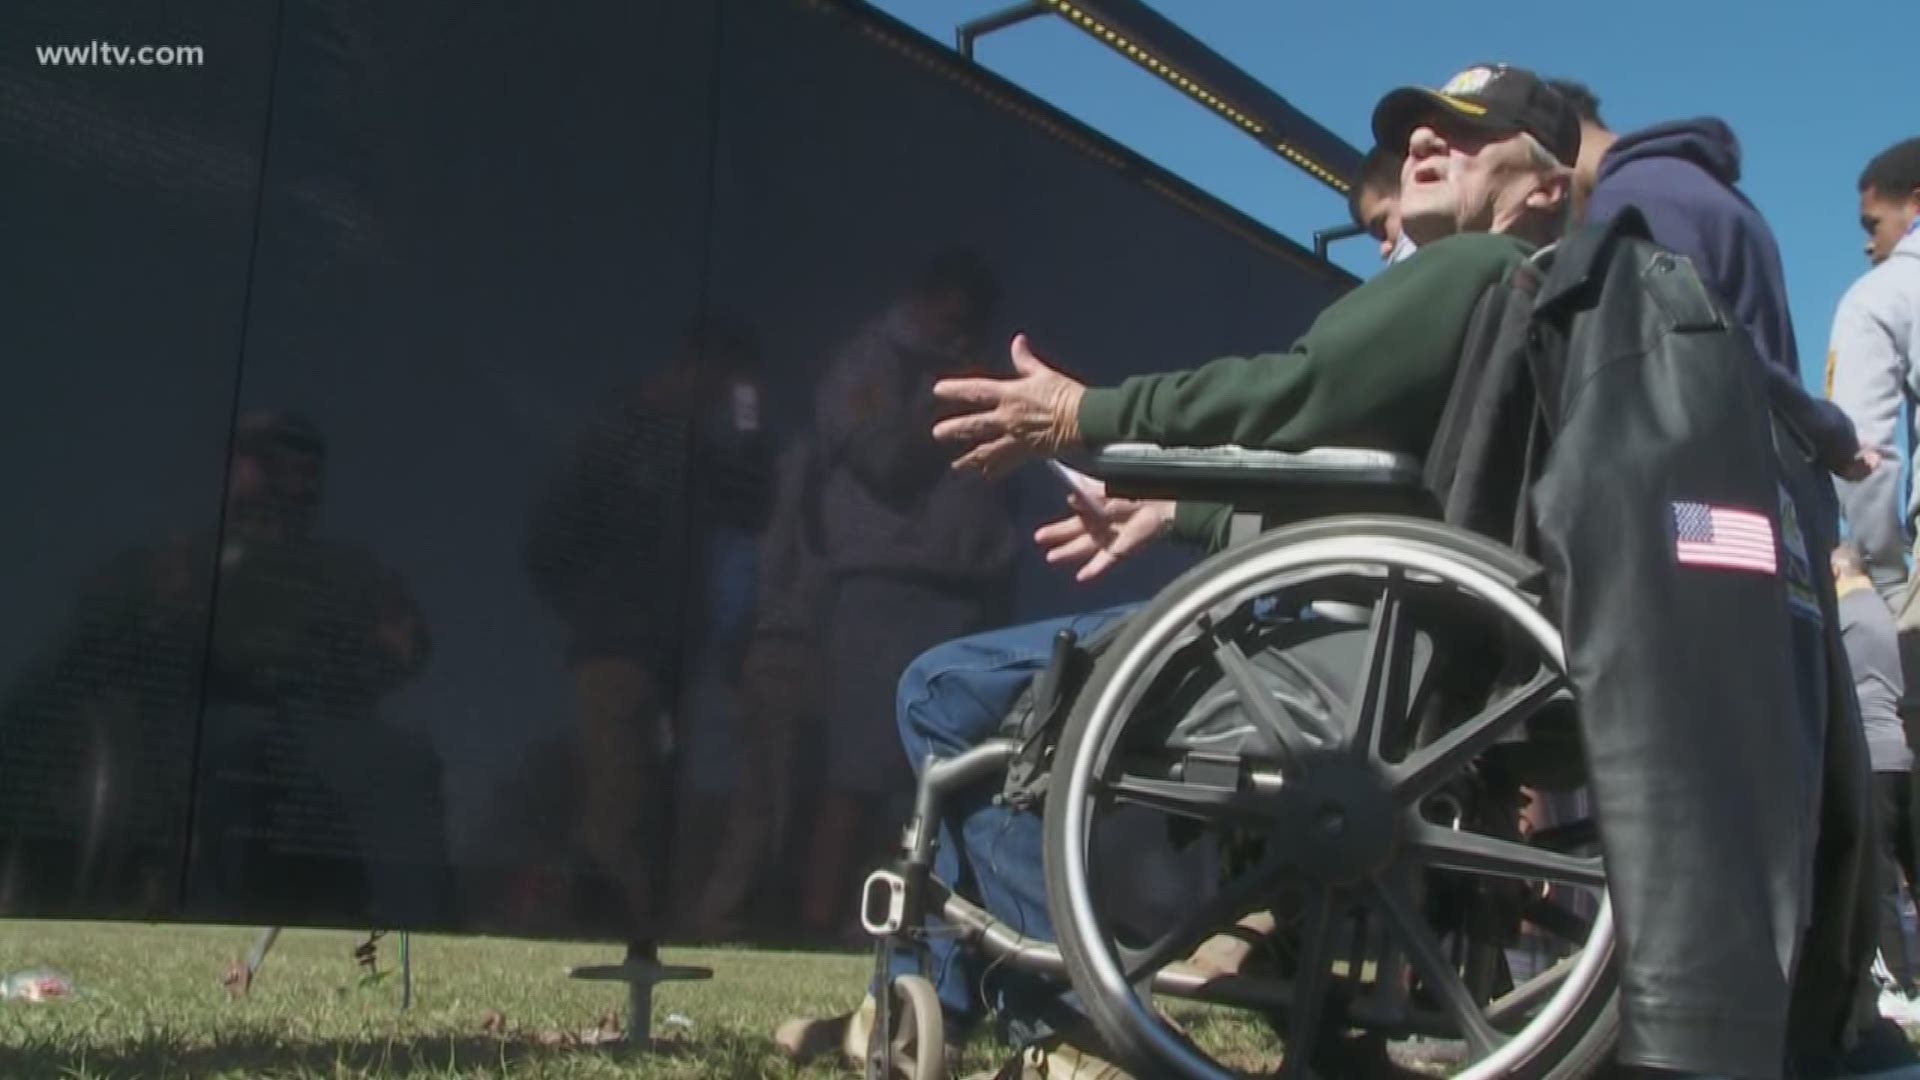 The Wall that Heals, a mobile replica that is about 3/4 the size of the original Vietnam Memorial Wall in Washington D.C. is in Franklinton, Louisiana and it's giving veterans who may not be able to make the trip, get a chance to see it for themselves.